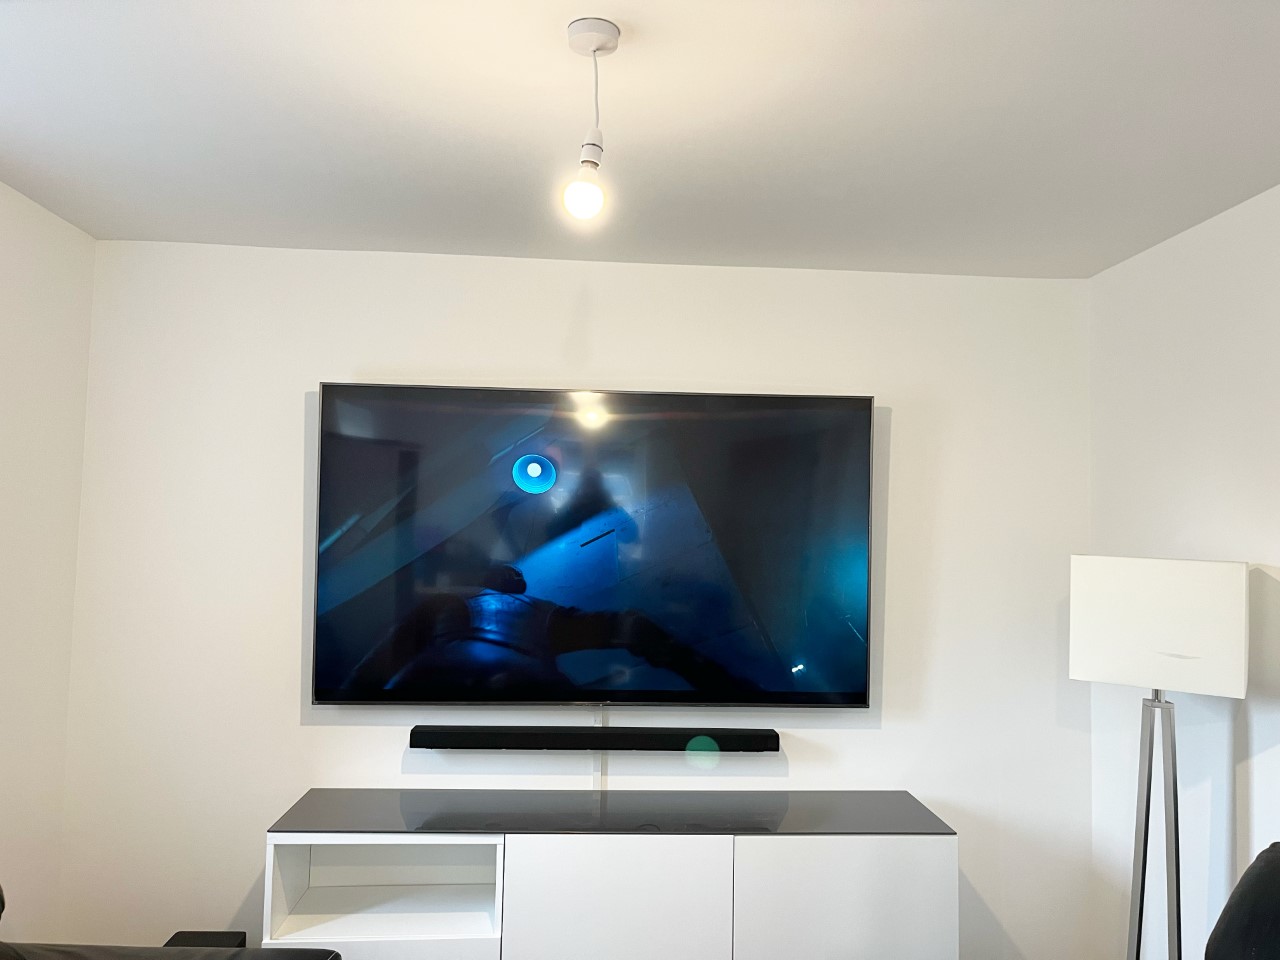 How to Mount a TV on the wall and what do you need?